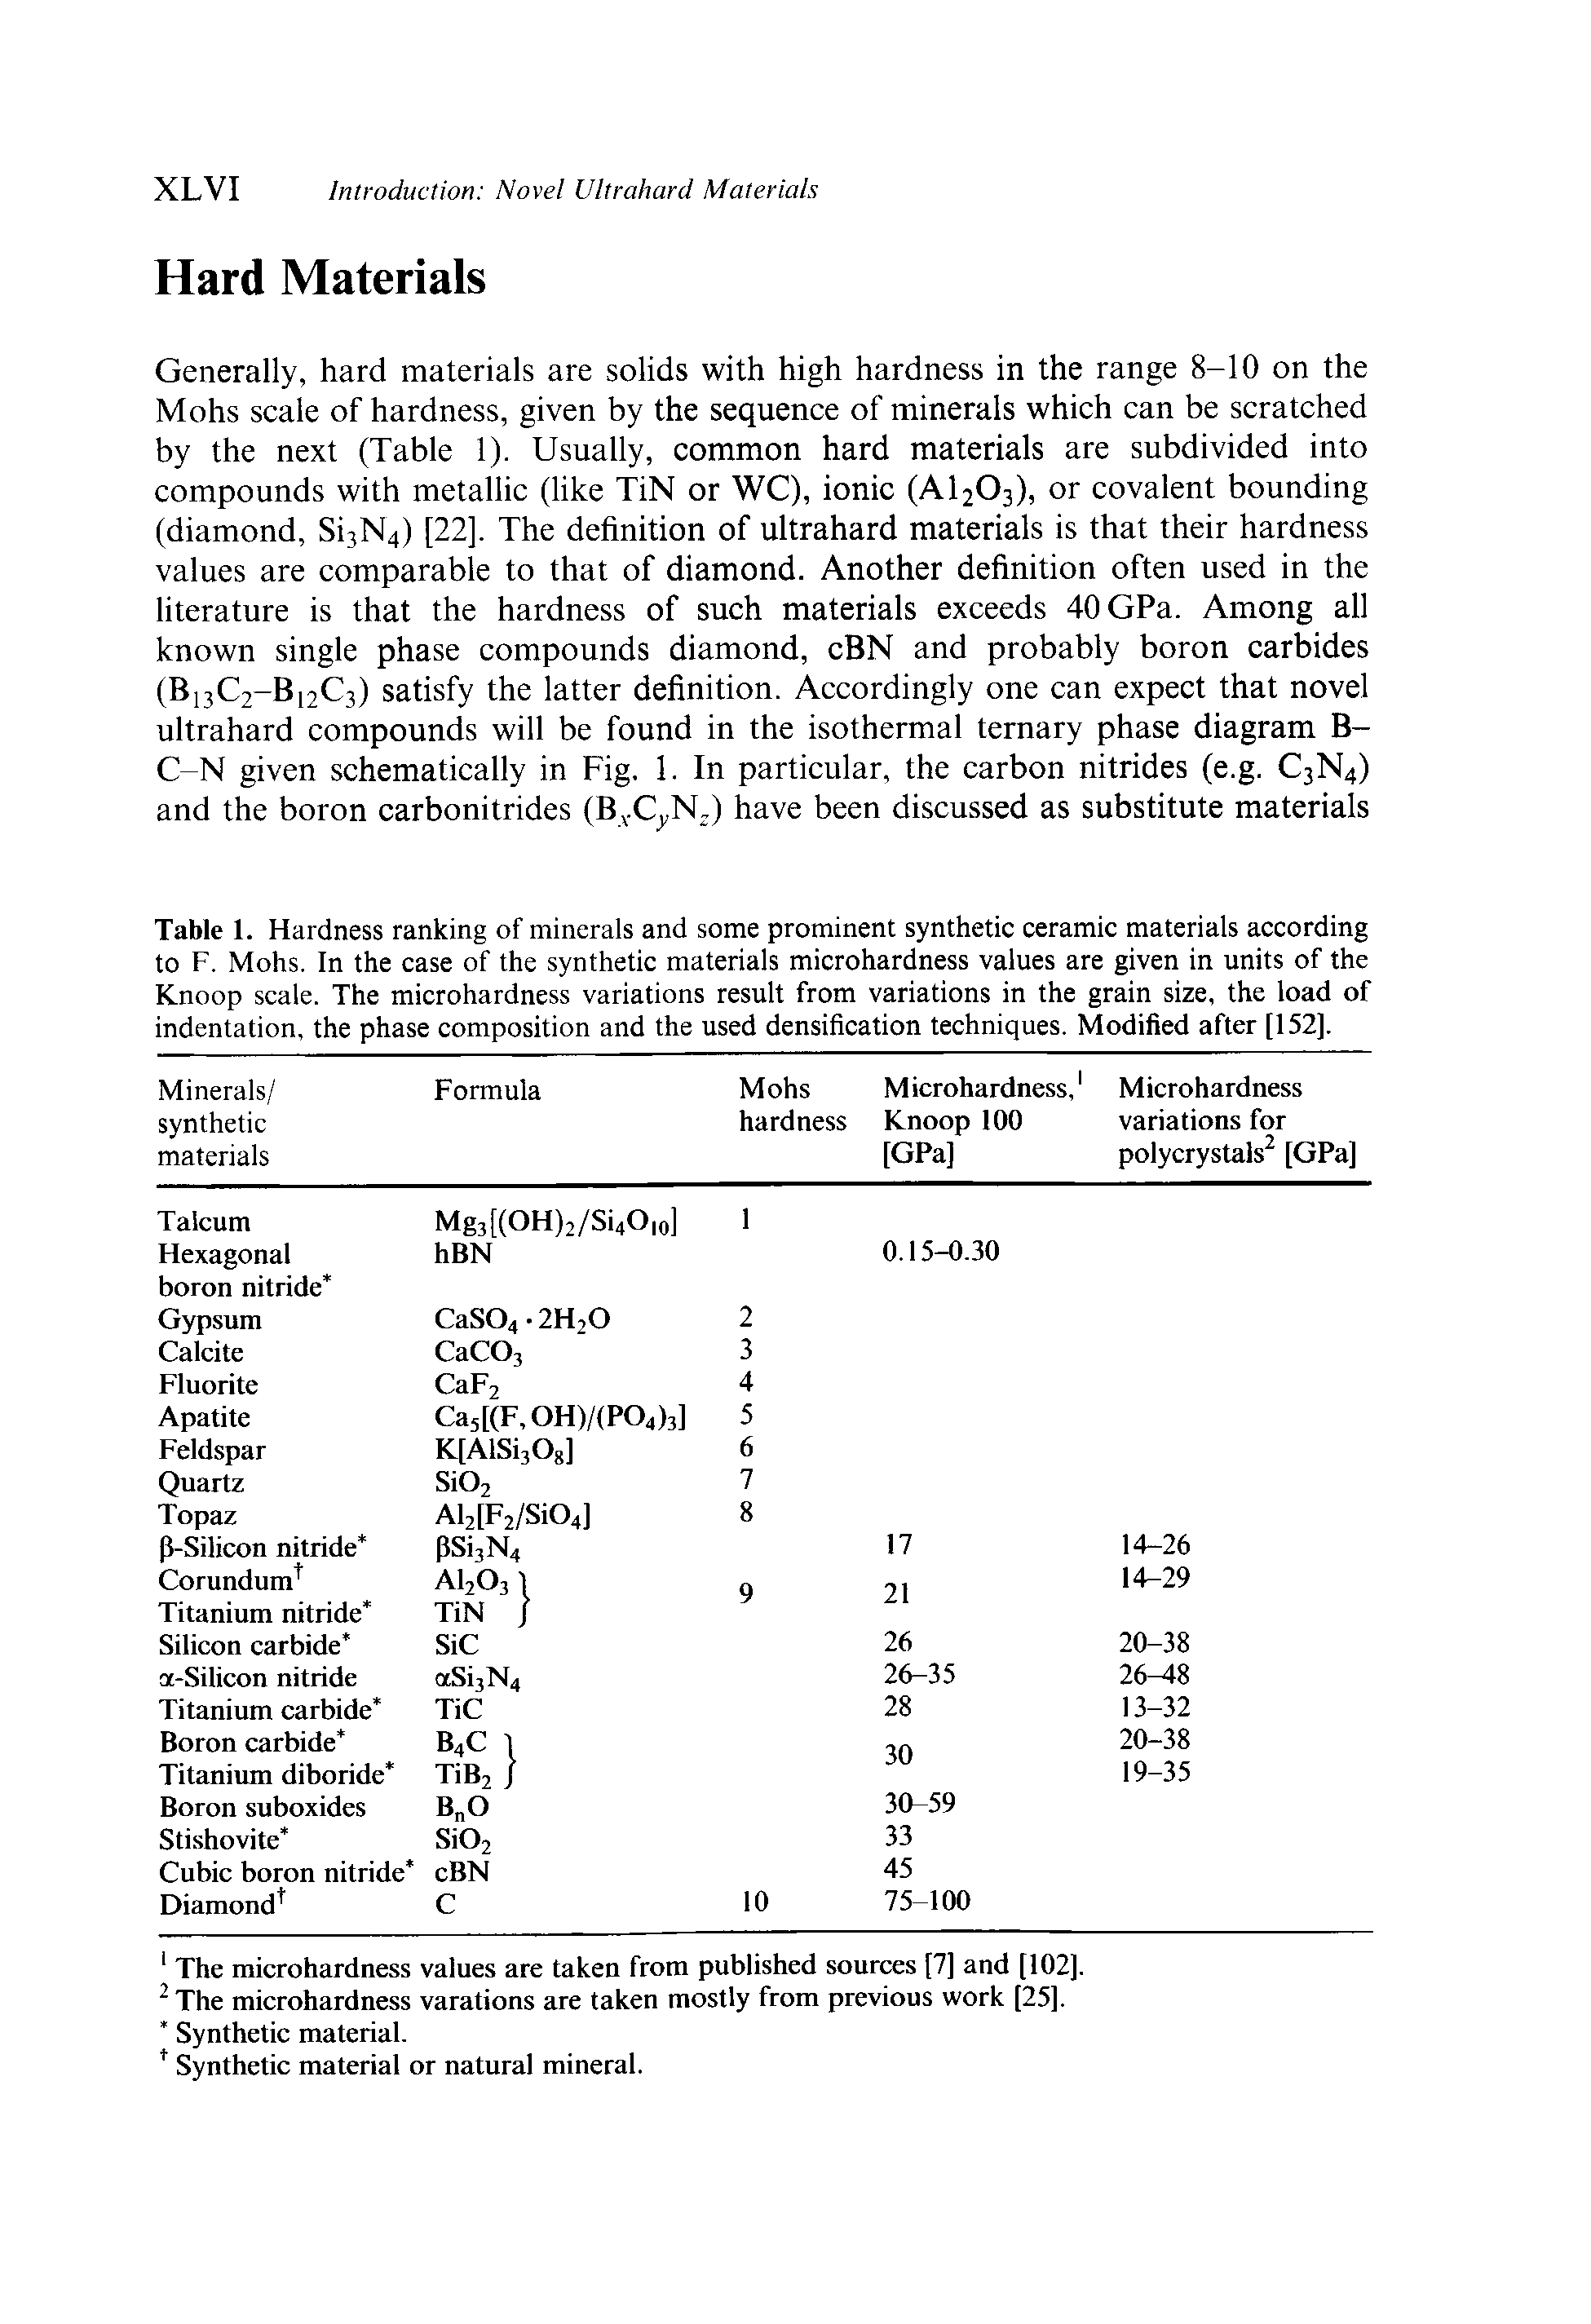 Table 1. Hardness ranking of minerals and some prominent synthetic ceramic materials according to F. Mohs. In the case of the synthetic materials microhardness values are given in units of the Knoop scale. The microhardness variations result from variations in the grain size, the load of indentation, the phase composition and the used densification techniques. Modified after [152].